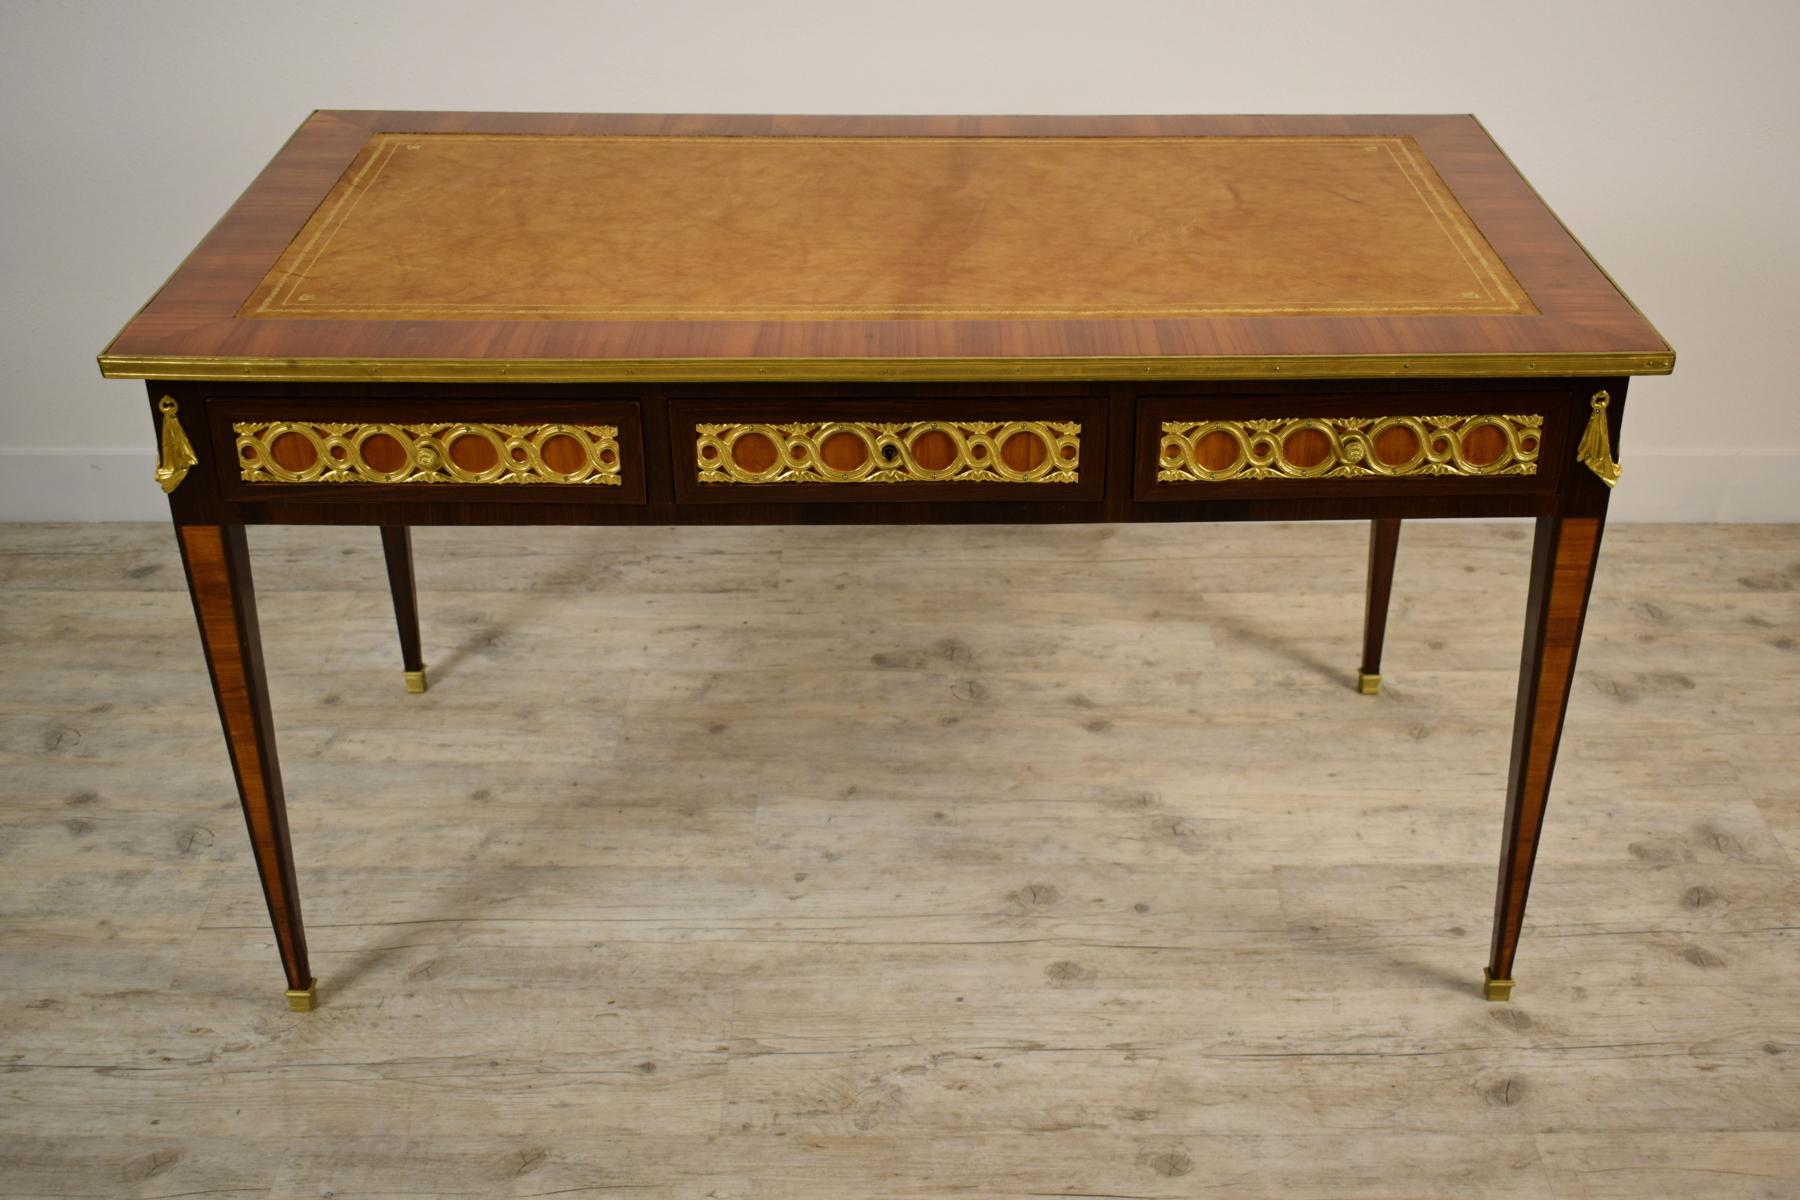 19th century French wood desk table with golden bronzes

The elegant desk table was made in France in the early nineteenth century. The structure is in paved wood decorated with gilt bronze applications. The top is covered in the middle with